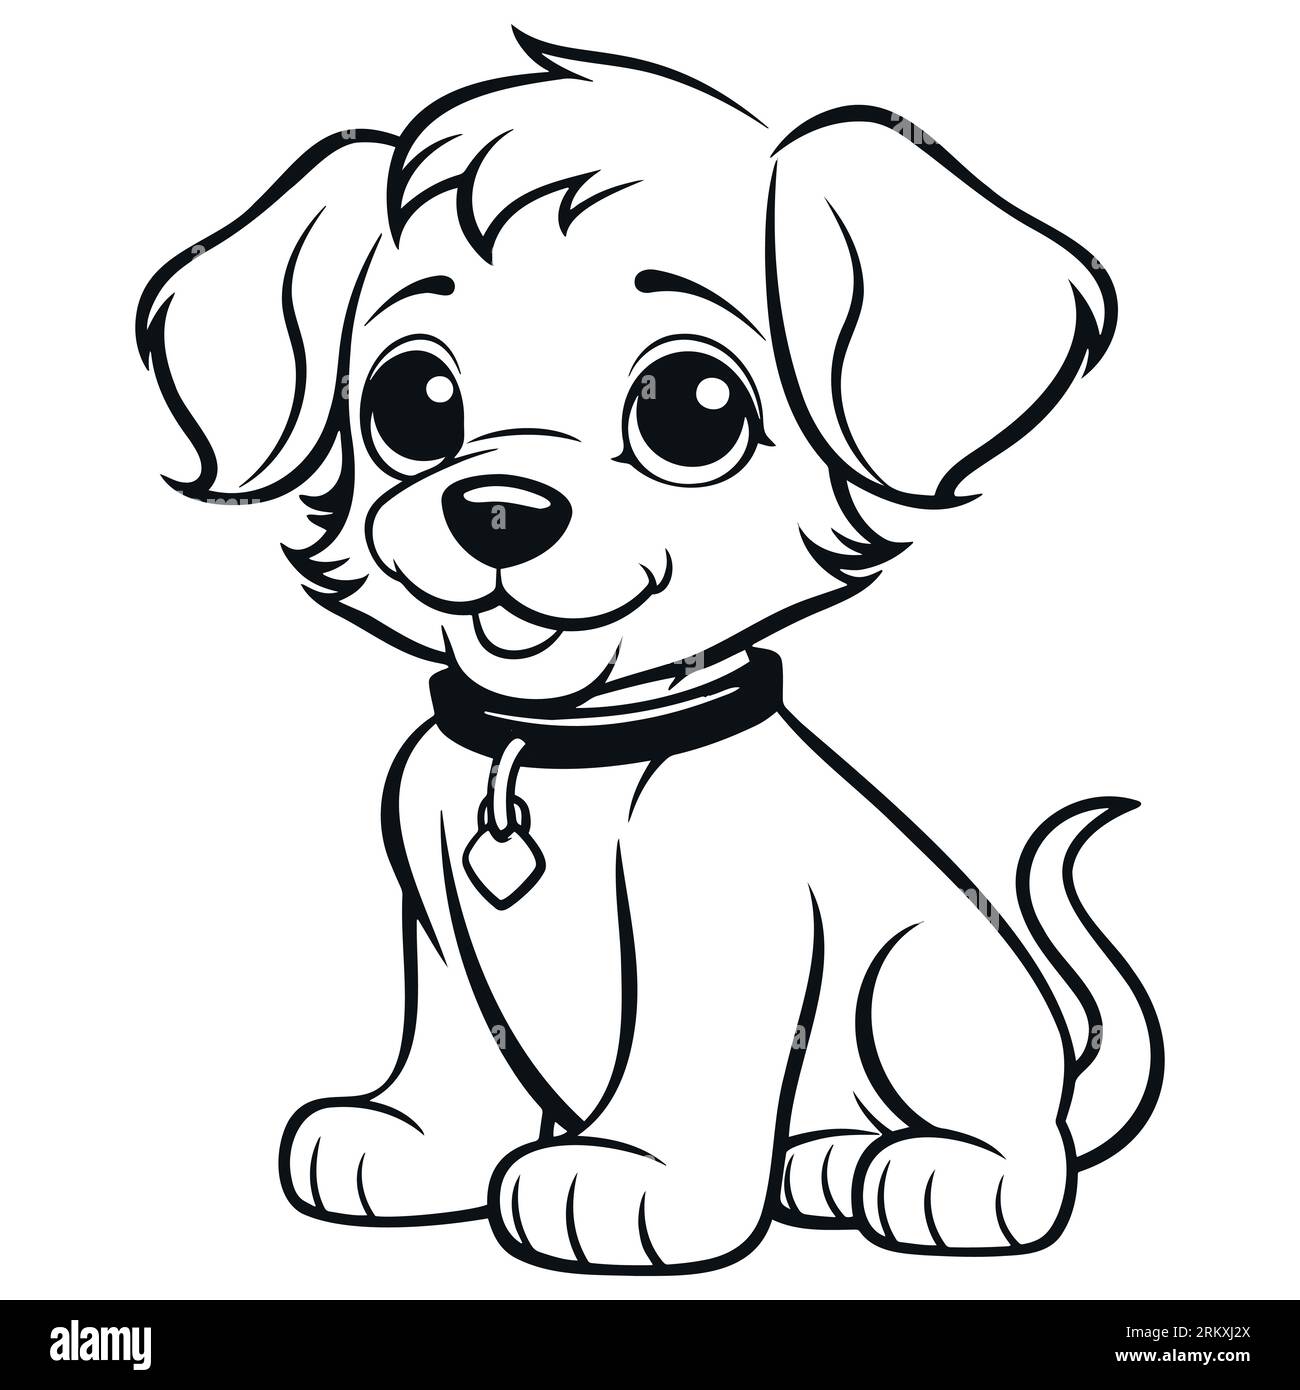 How to Draw a Puppy